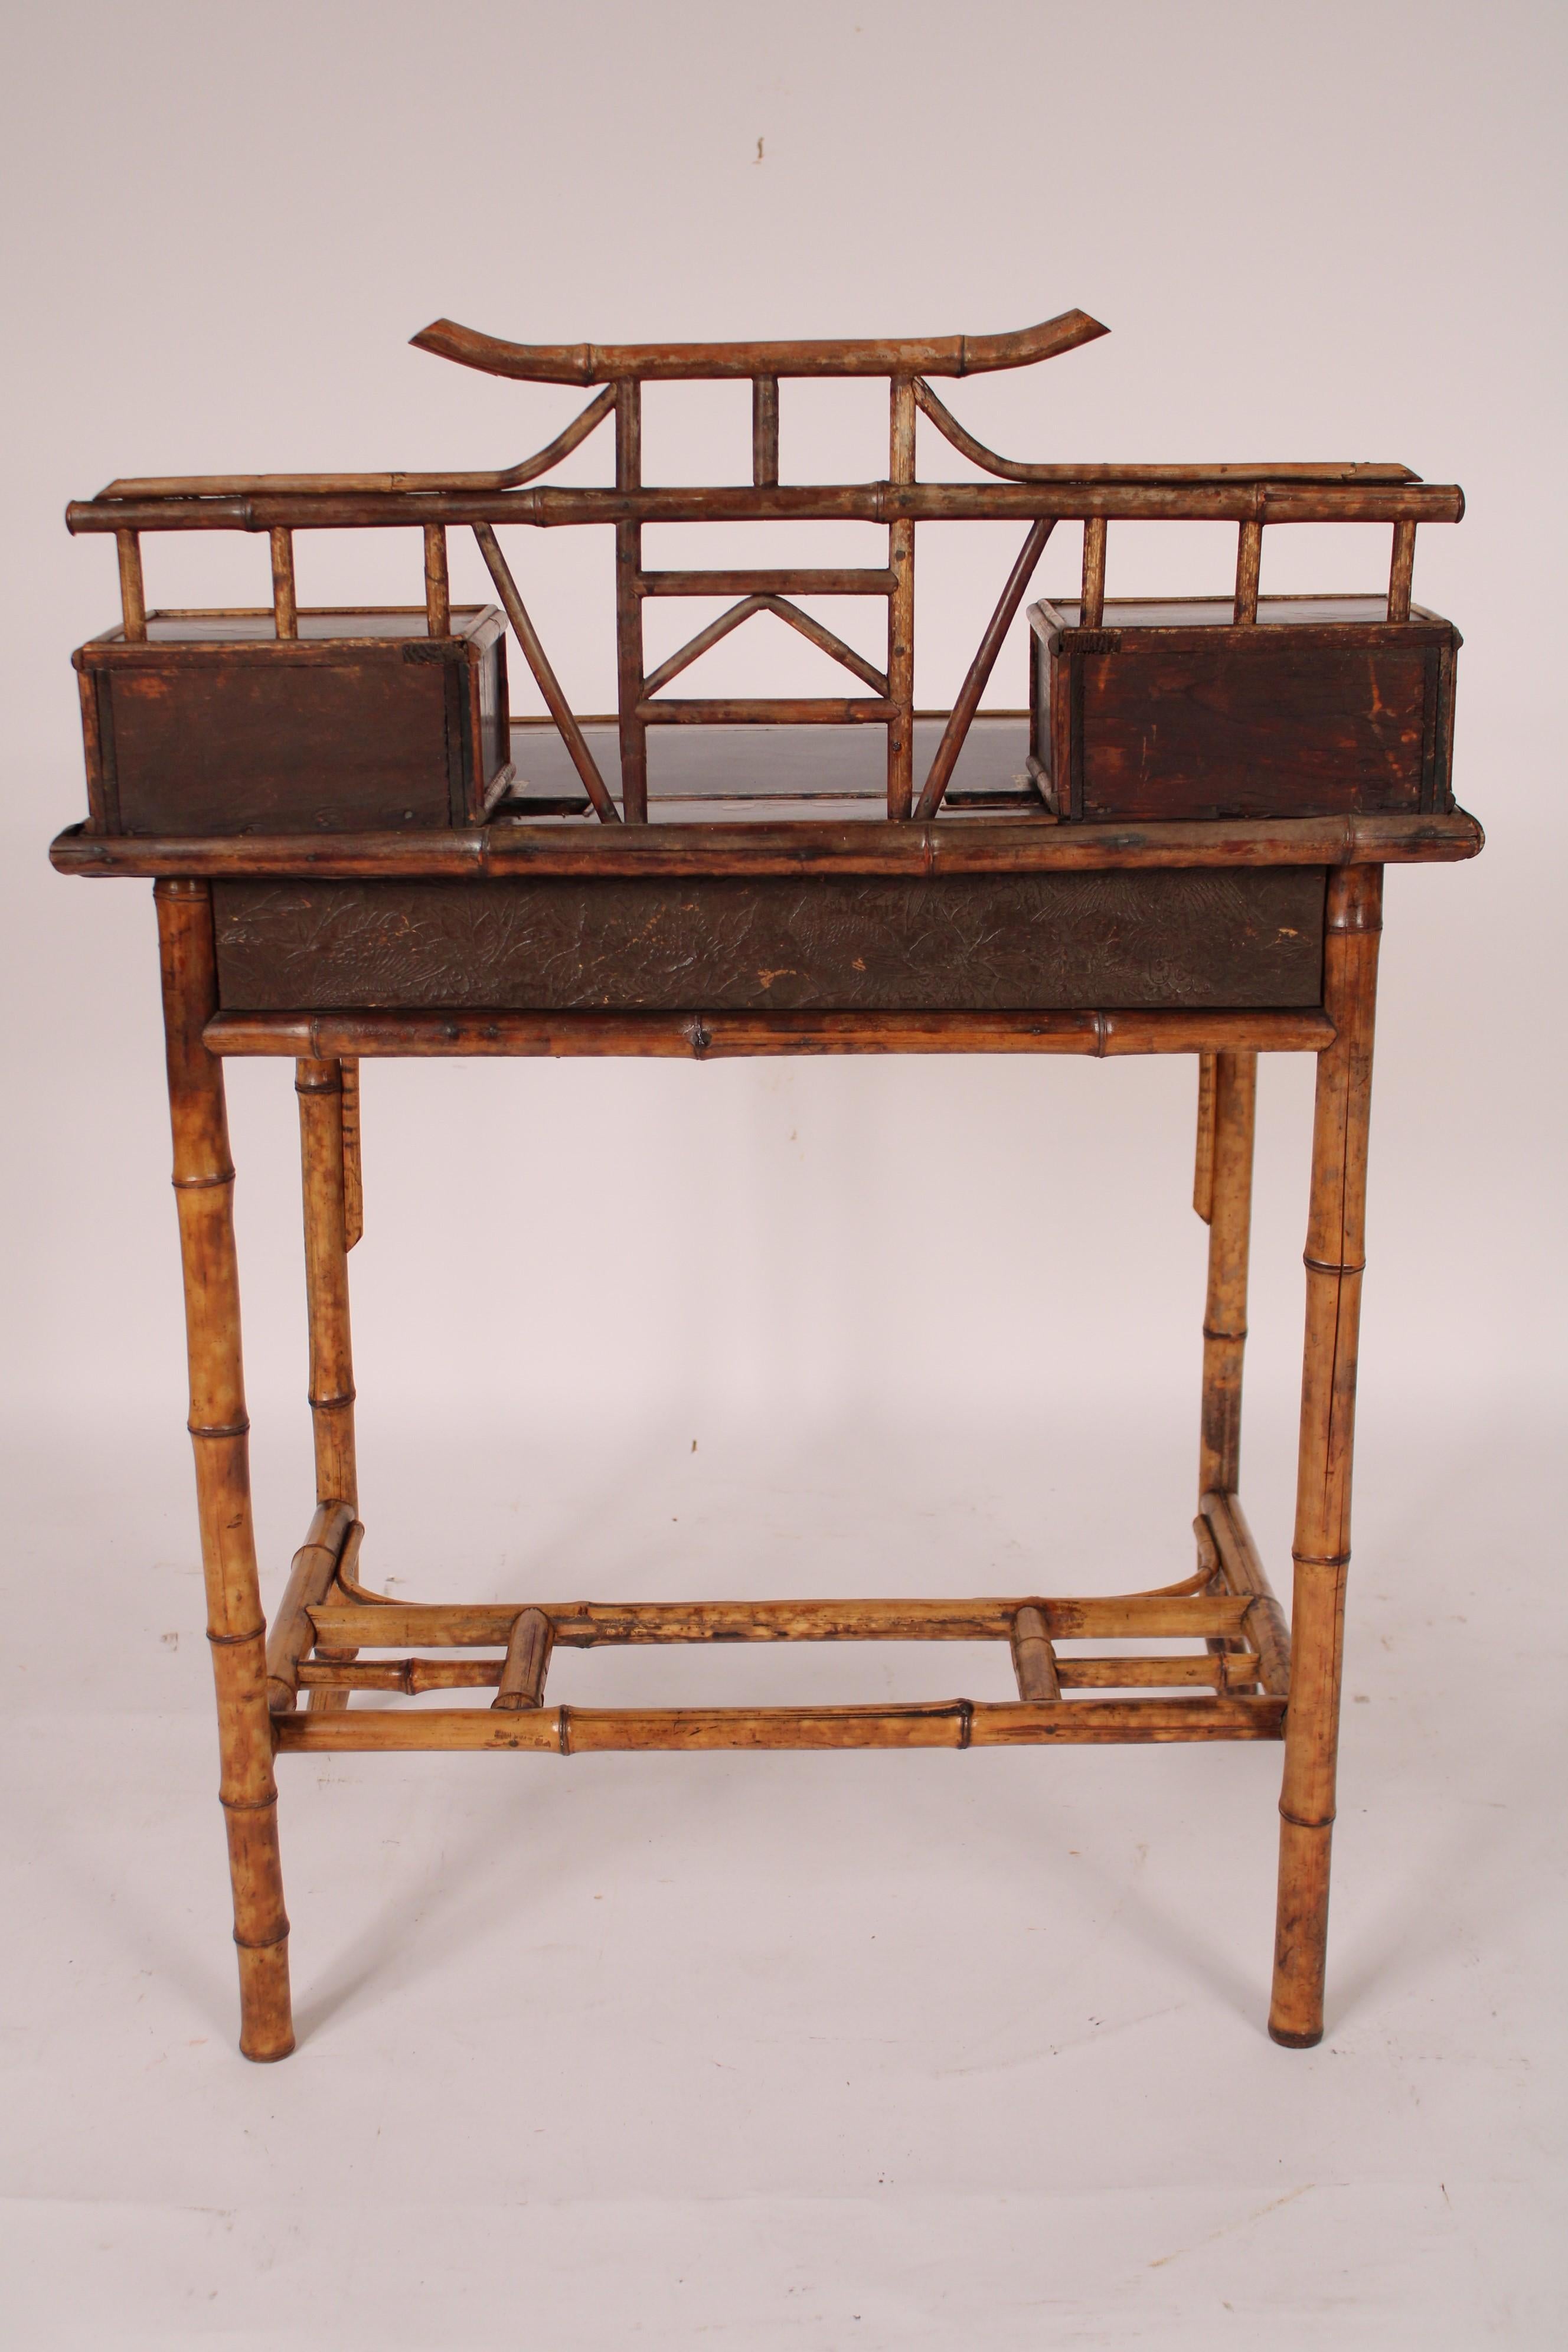 Early 20th Century Aesthetic Movement Bamboo and Lacquer Writing Table